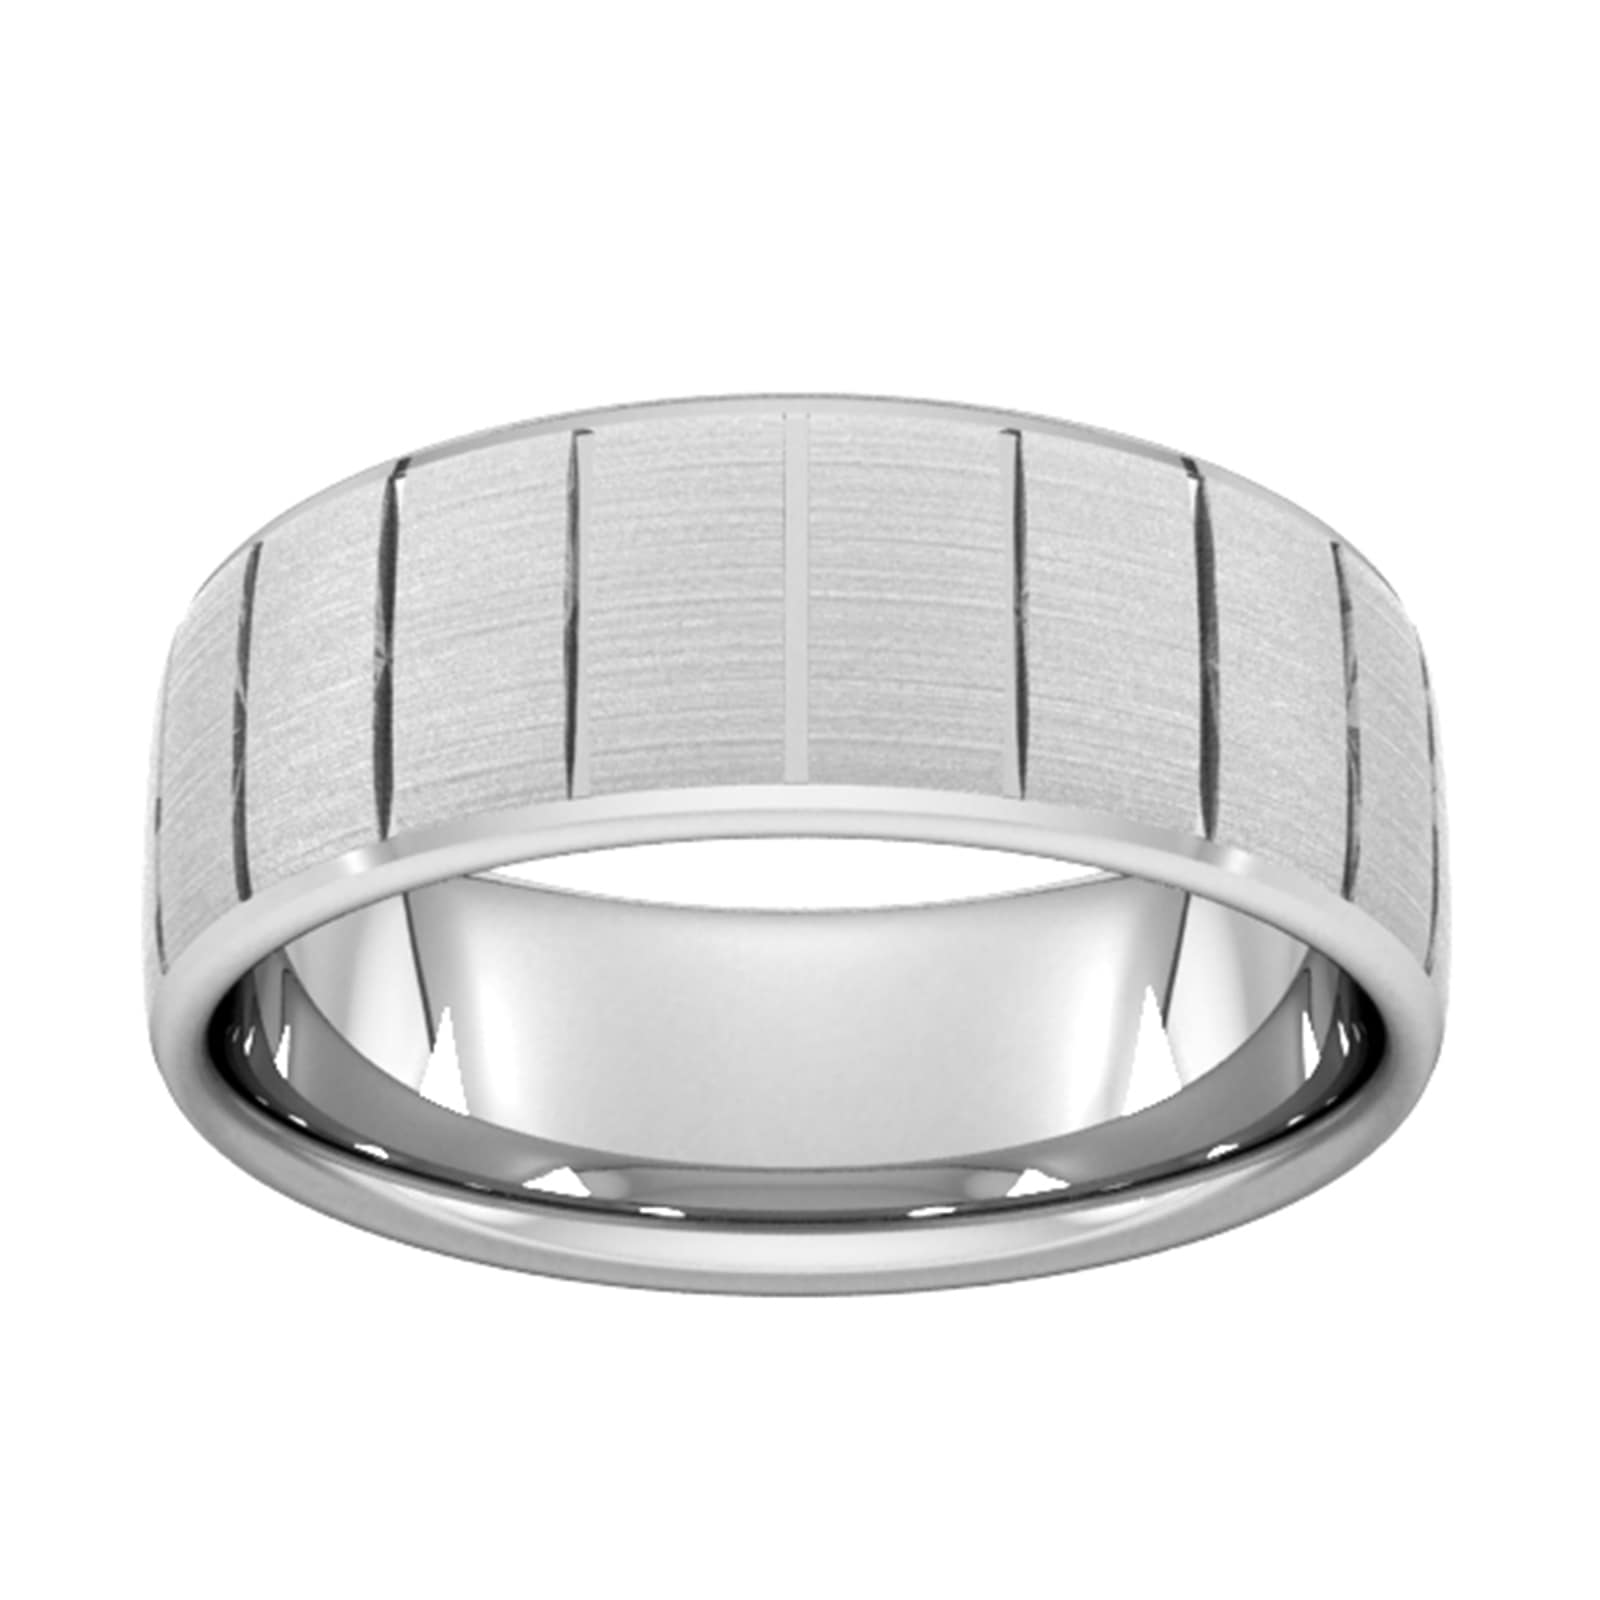 8mm Slight Court Extra Heavy Vertical Lines Wedding Ring In 9 Carat White Gold - Ring Size P